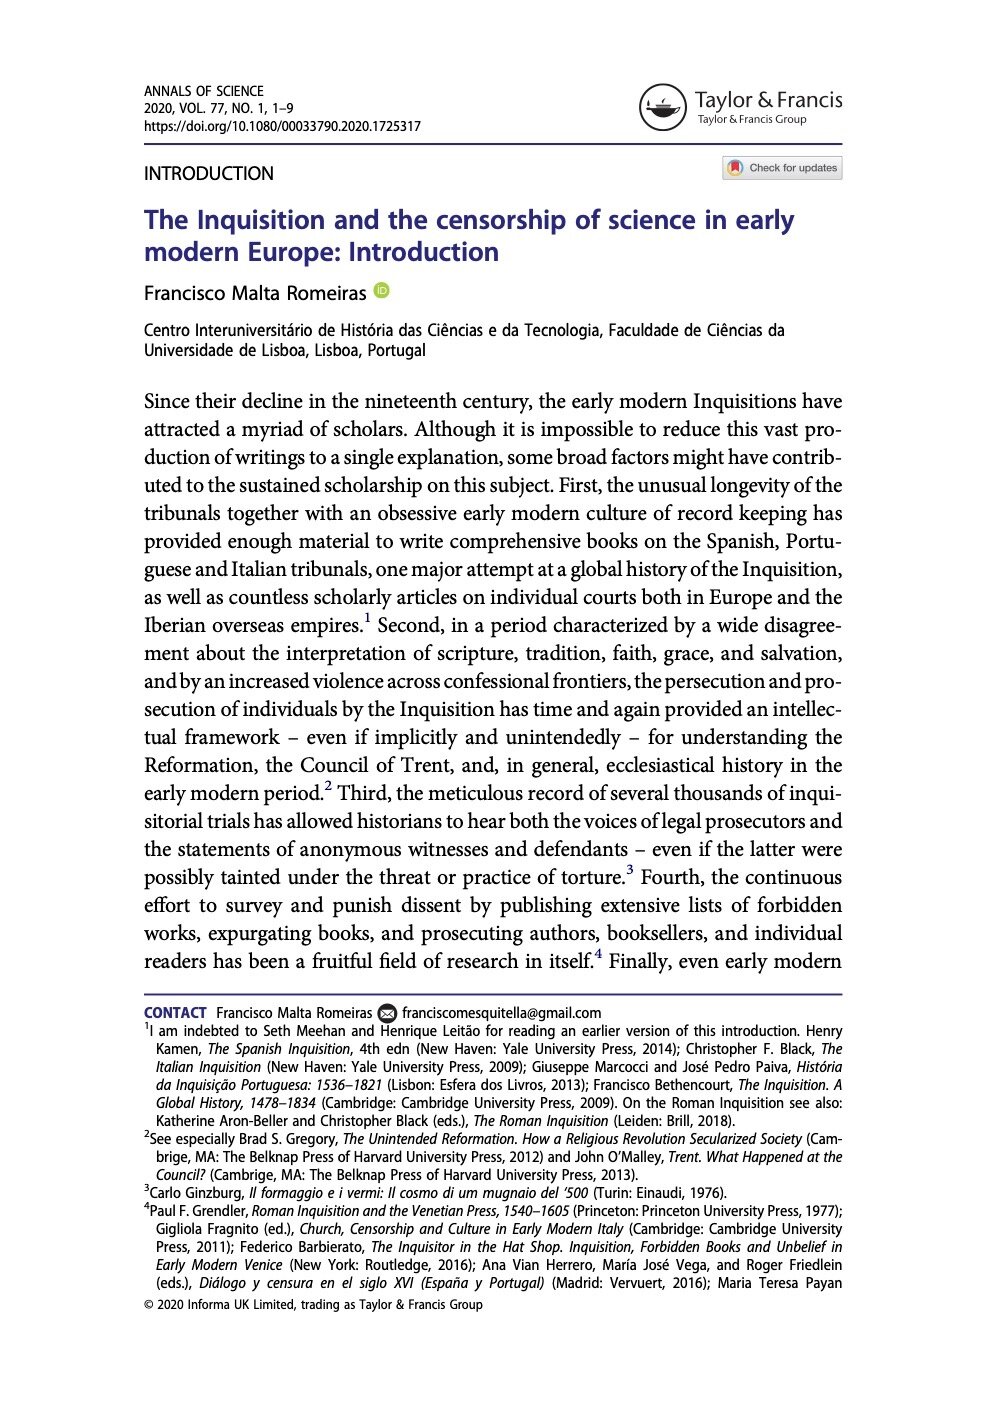 The Inquisition and the censorship of science in early modern Europe: Introduction, Capa